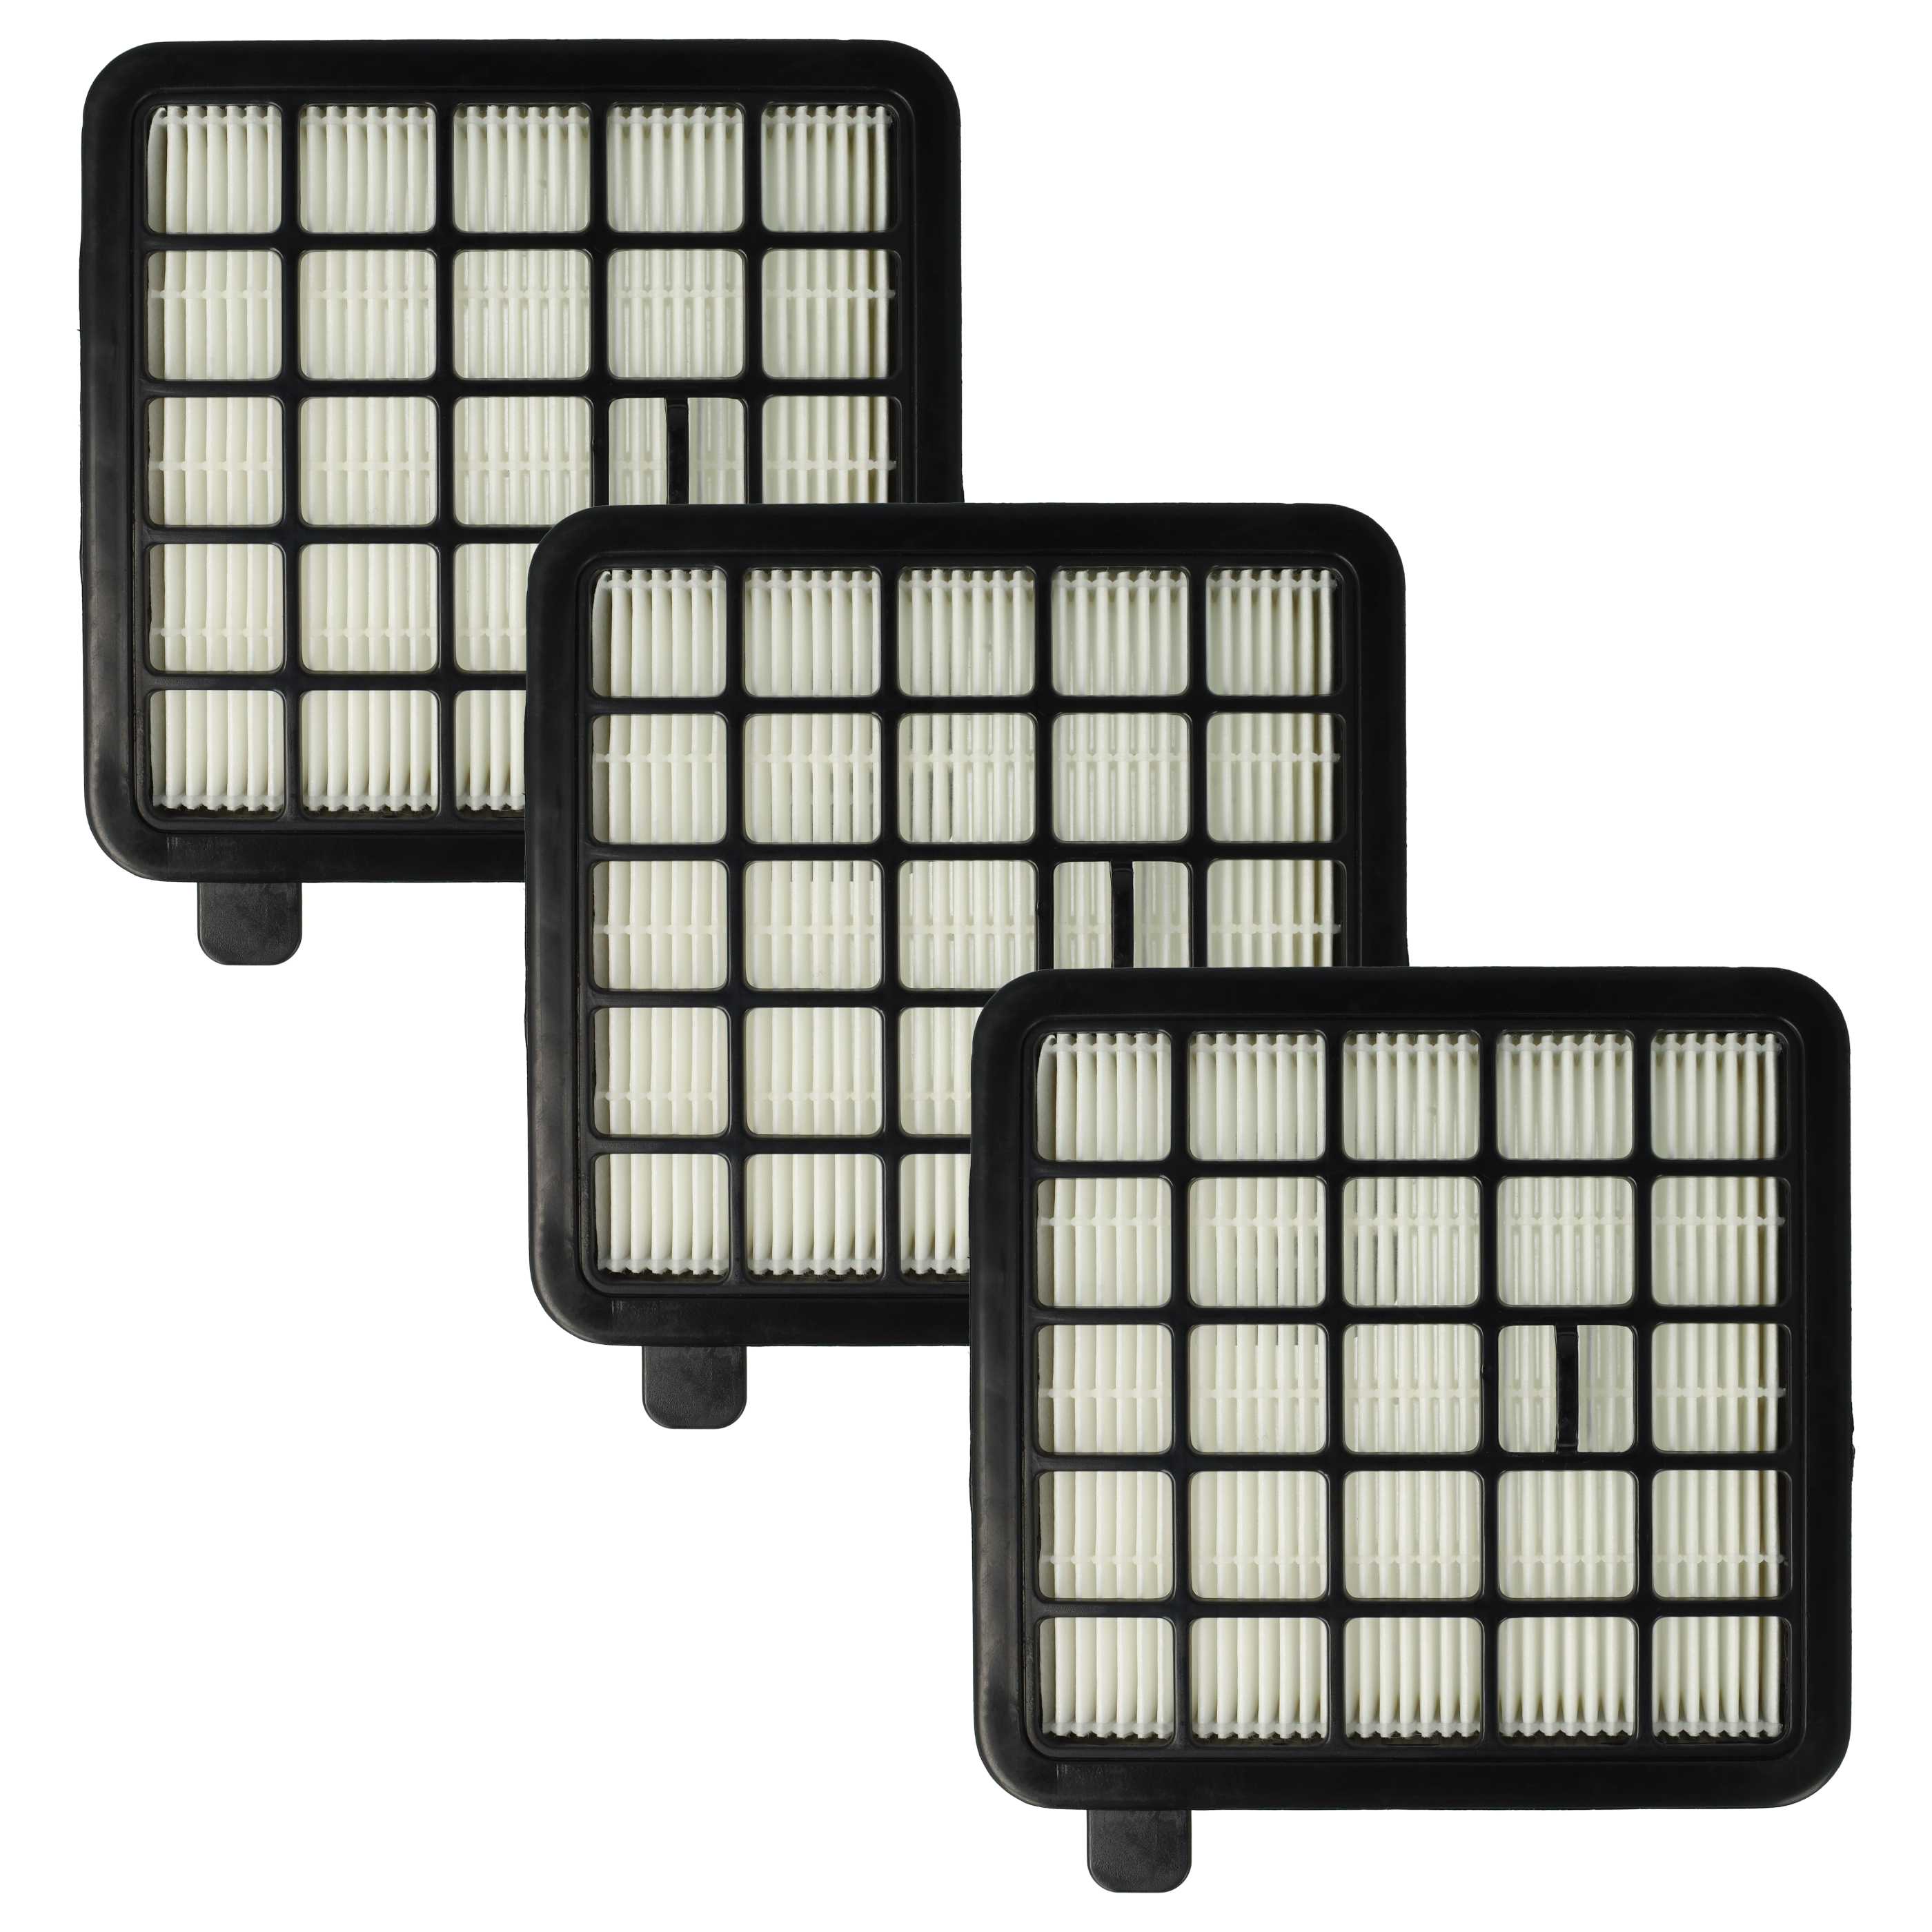 3x HEPA filter replaces Beko 9178011268 for GrundigVacuum Cleaner, filter class H11